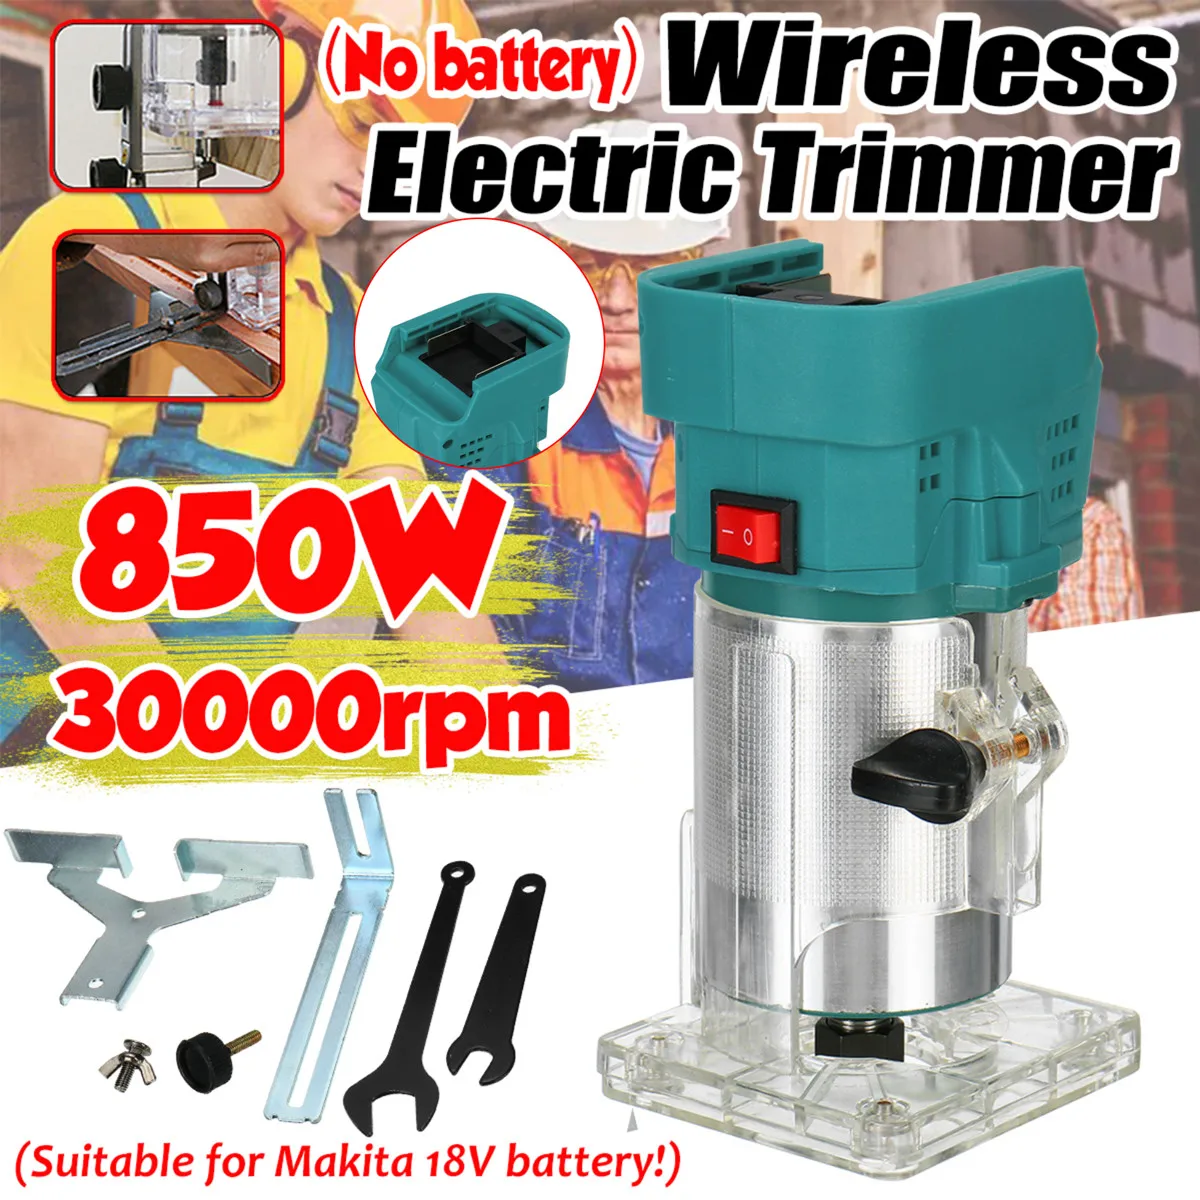 

850W Cordless Handheld Electric Trimmer Woodworking Palm Router Laminate Trimming Carving Machine Router Wood